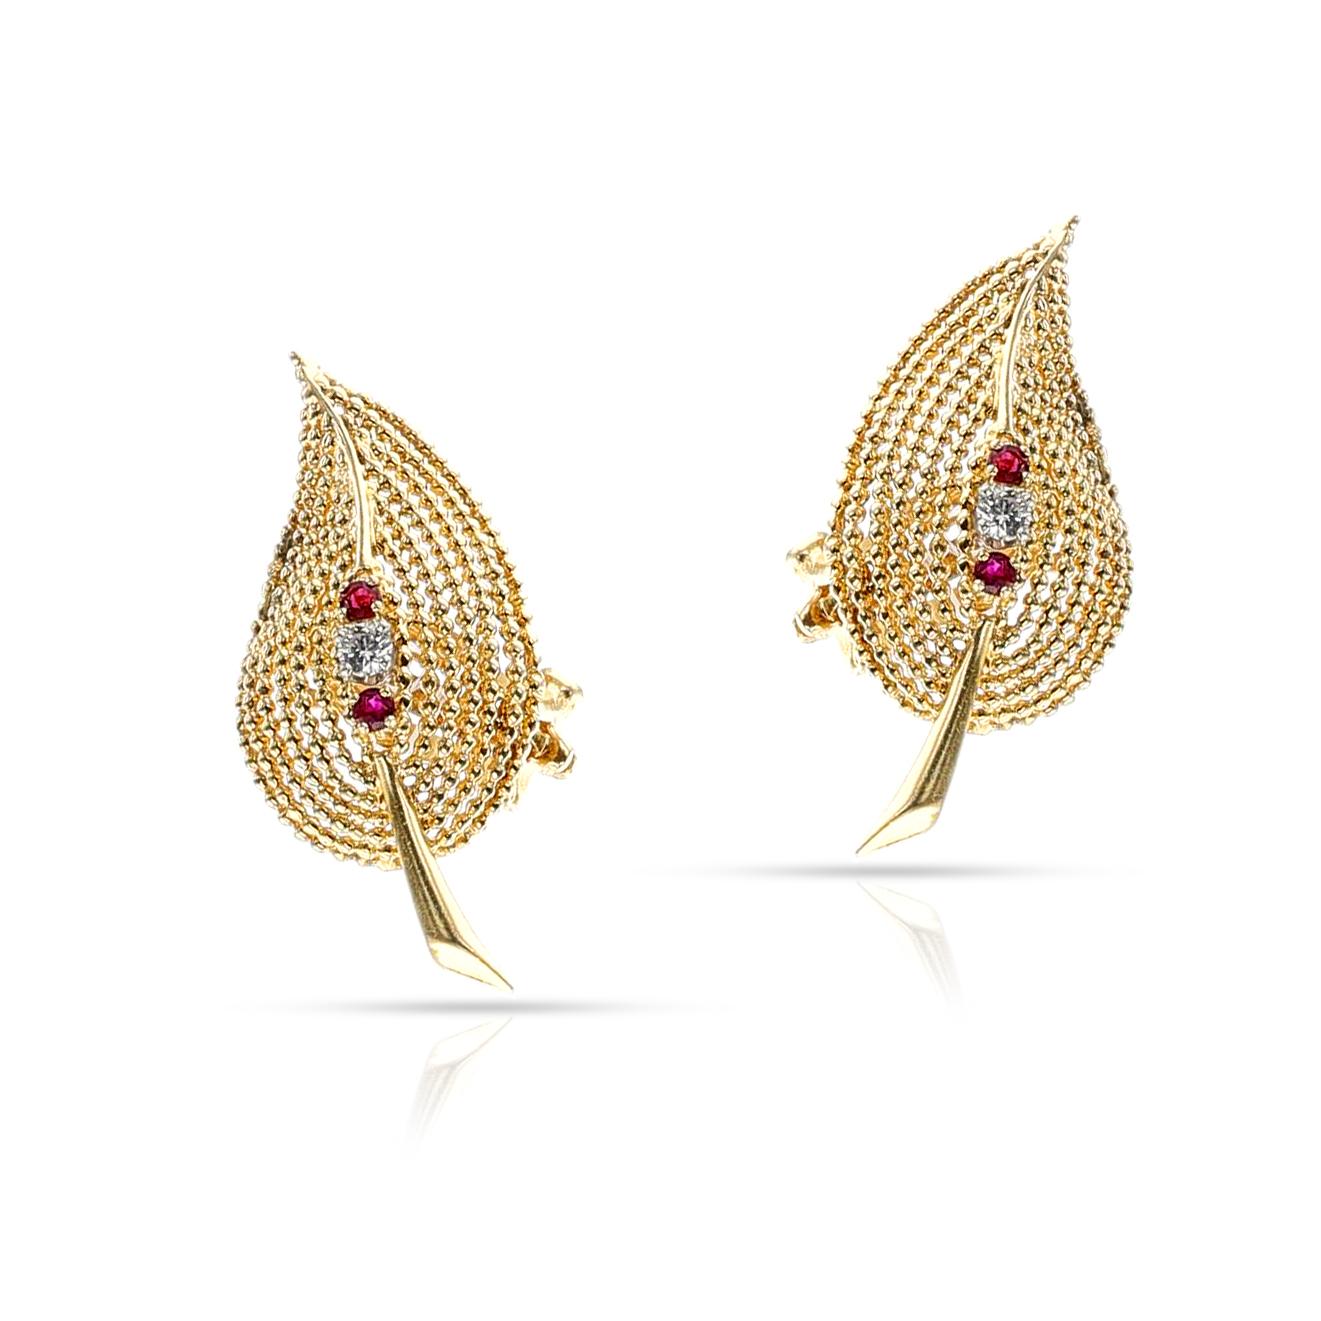   A set of 14k yellow gold Tiffany & Co. Ruby and Diamond Leaf Earrings adorns the ears, an ornate and stylish statement of 7.20 grams in total weight, with a length of 1.4